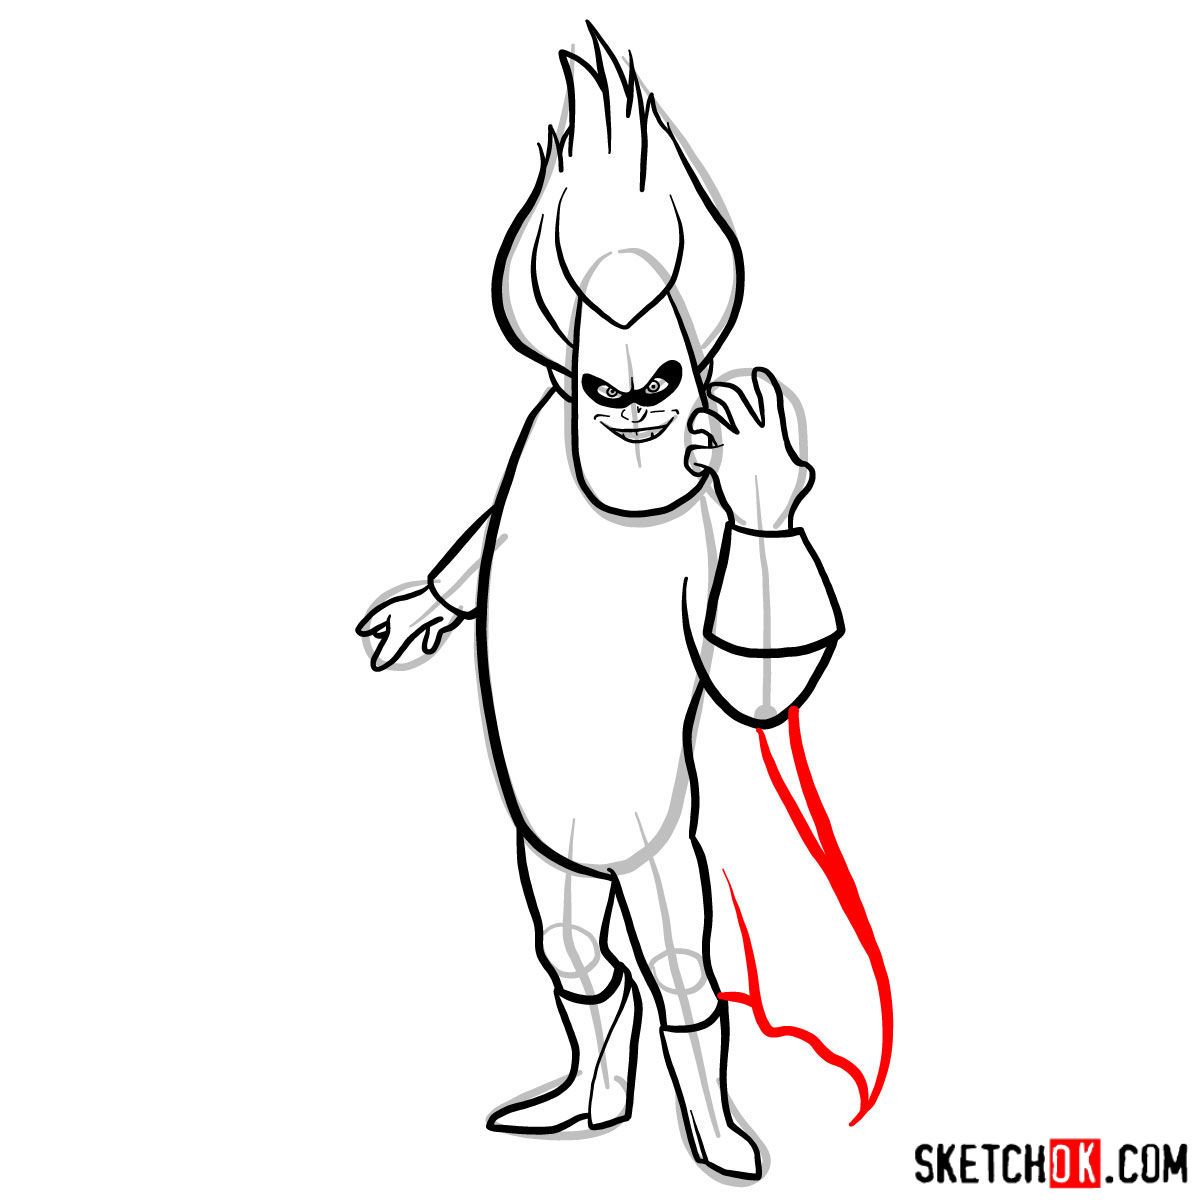 How to draw Buddy Pine (Syndrome) from The Incredibles - step 11